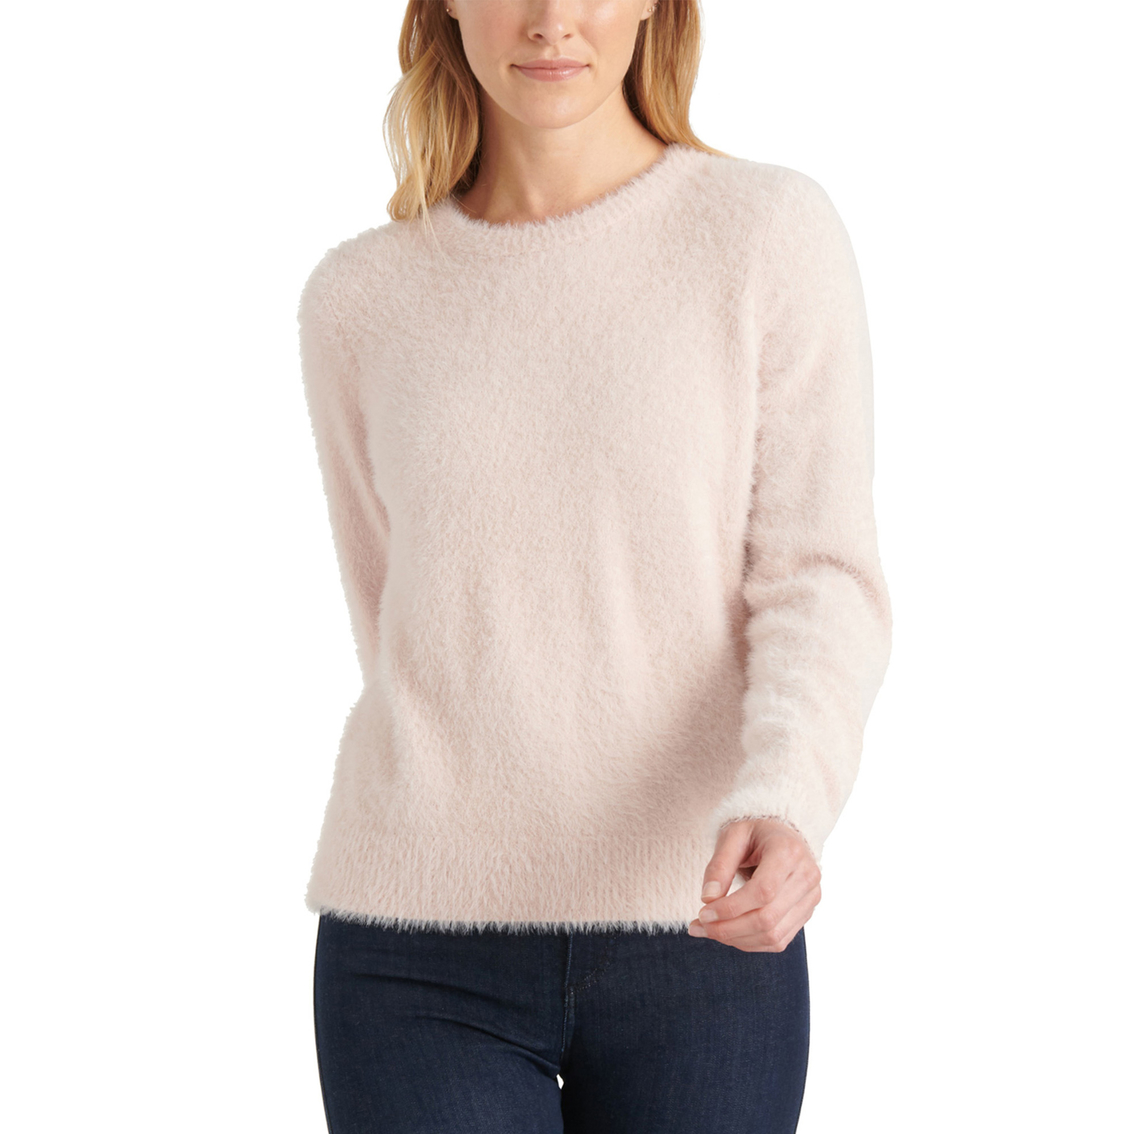 Lucky Brand Eyelash Sweater, Sweaters, Clothing & Accessories